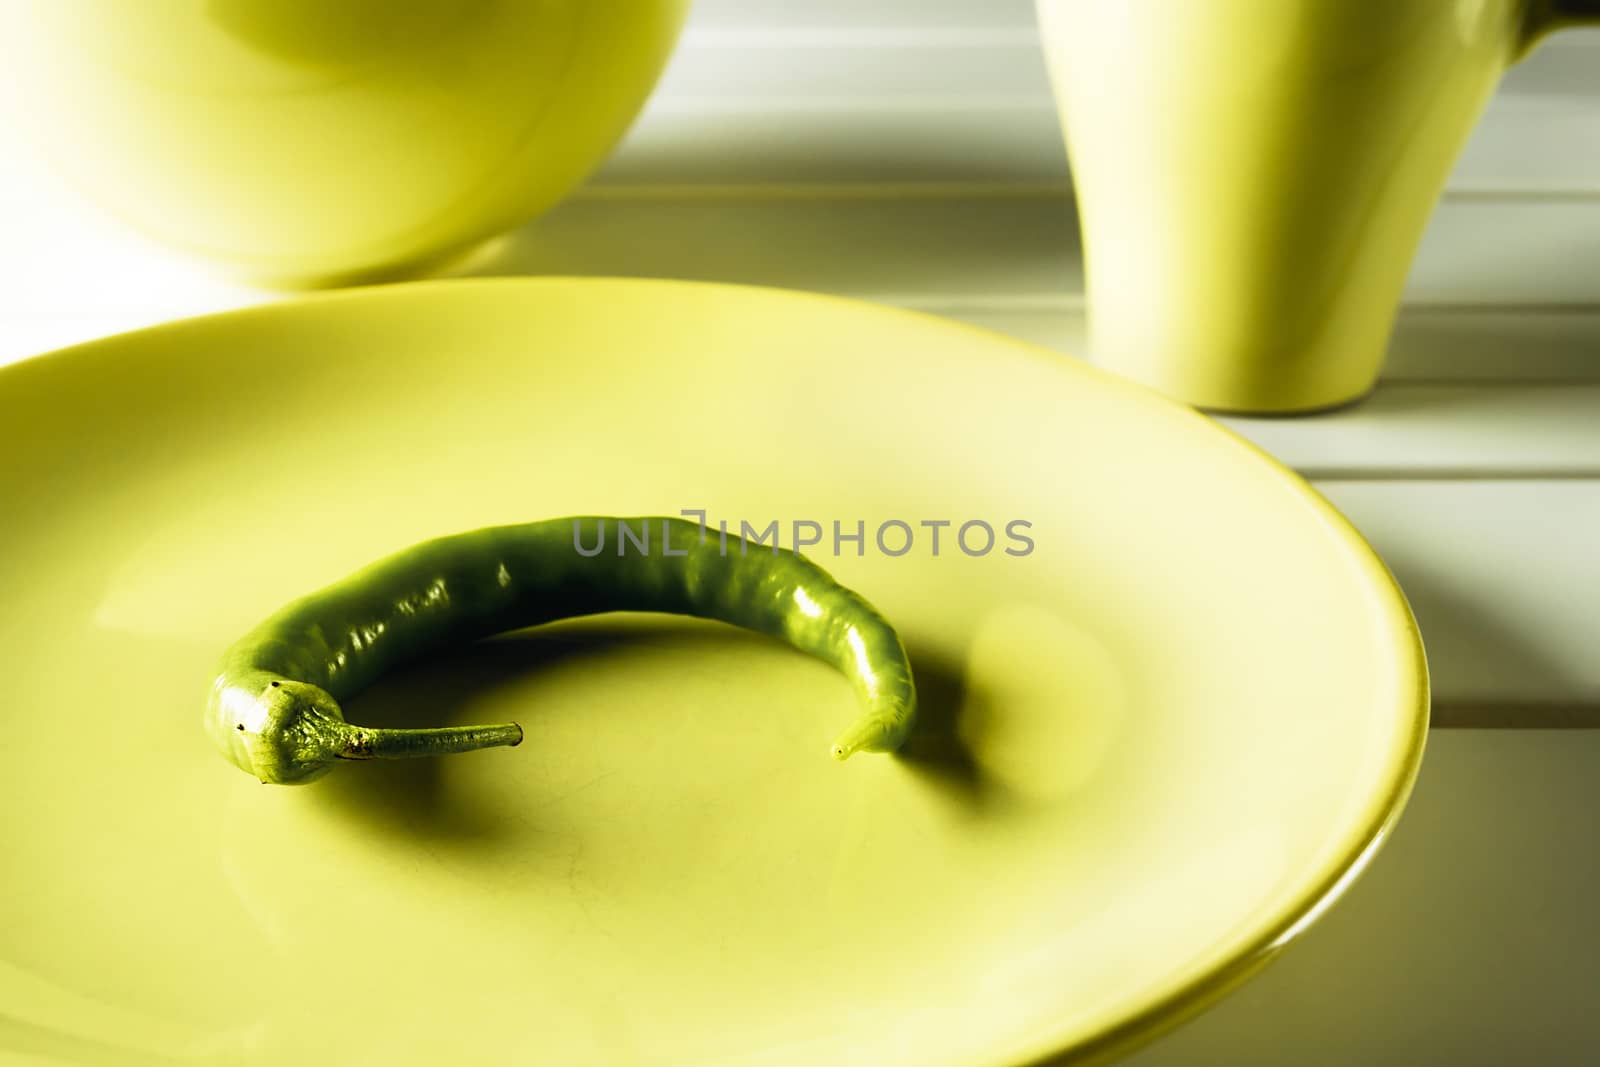 Green hot pepper on green dish over white wood. Horizontal image.